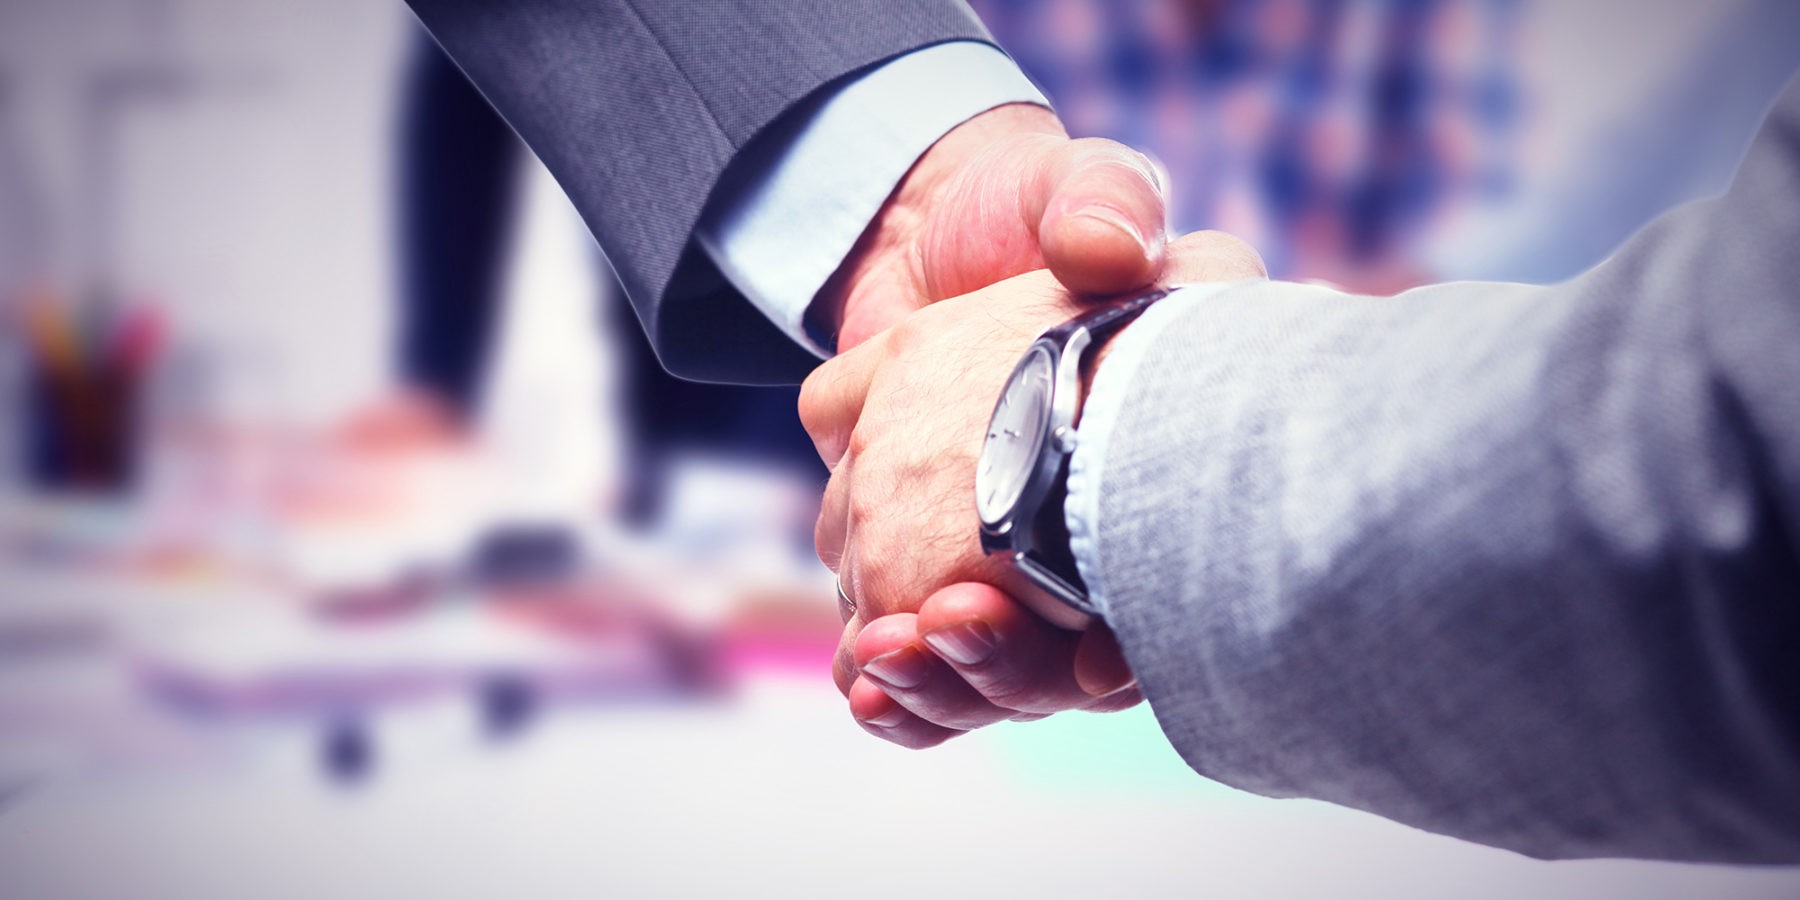 close up image of two business men shaking hands after forming a partnership